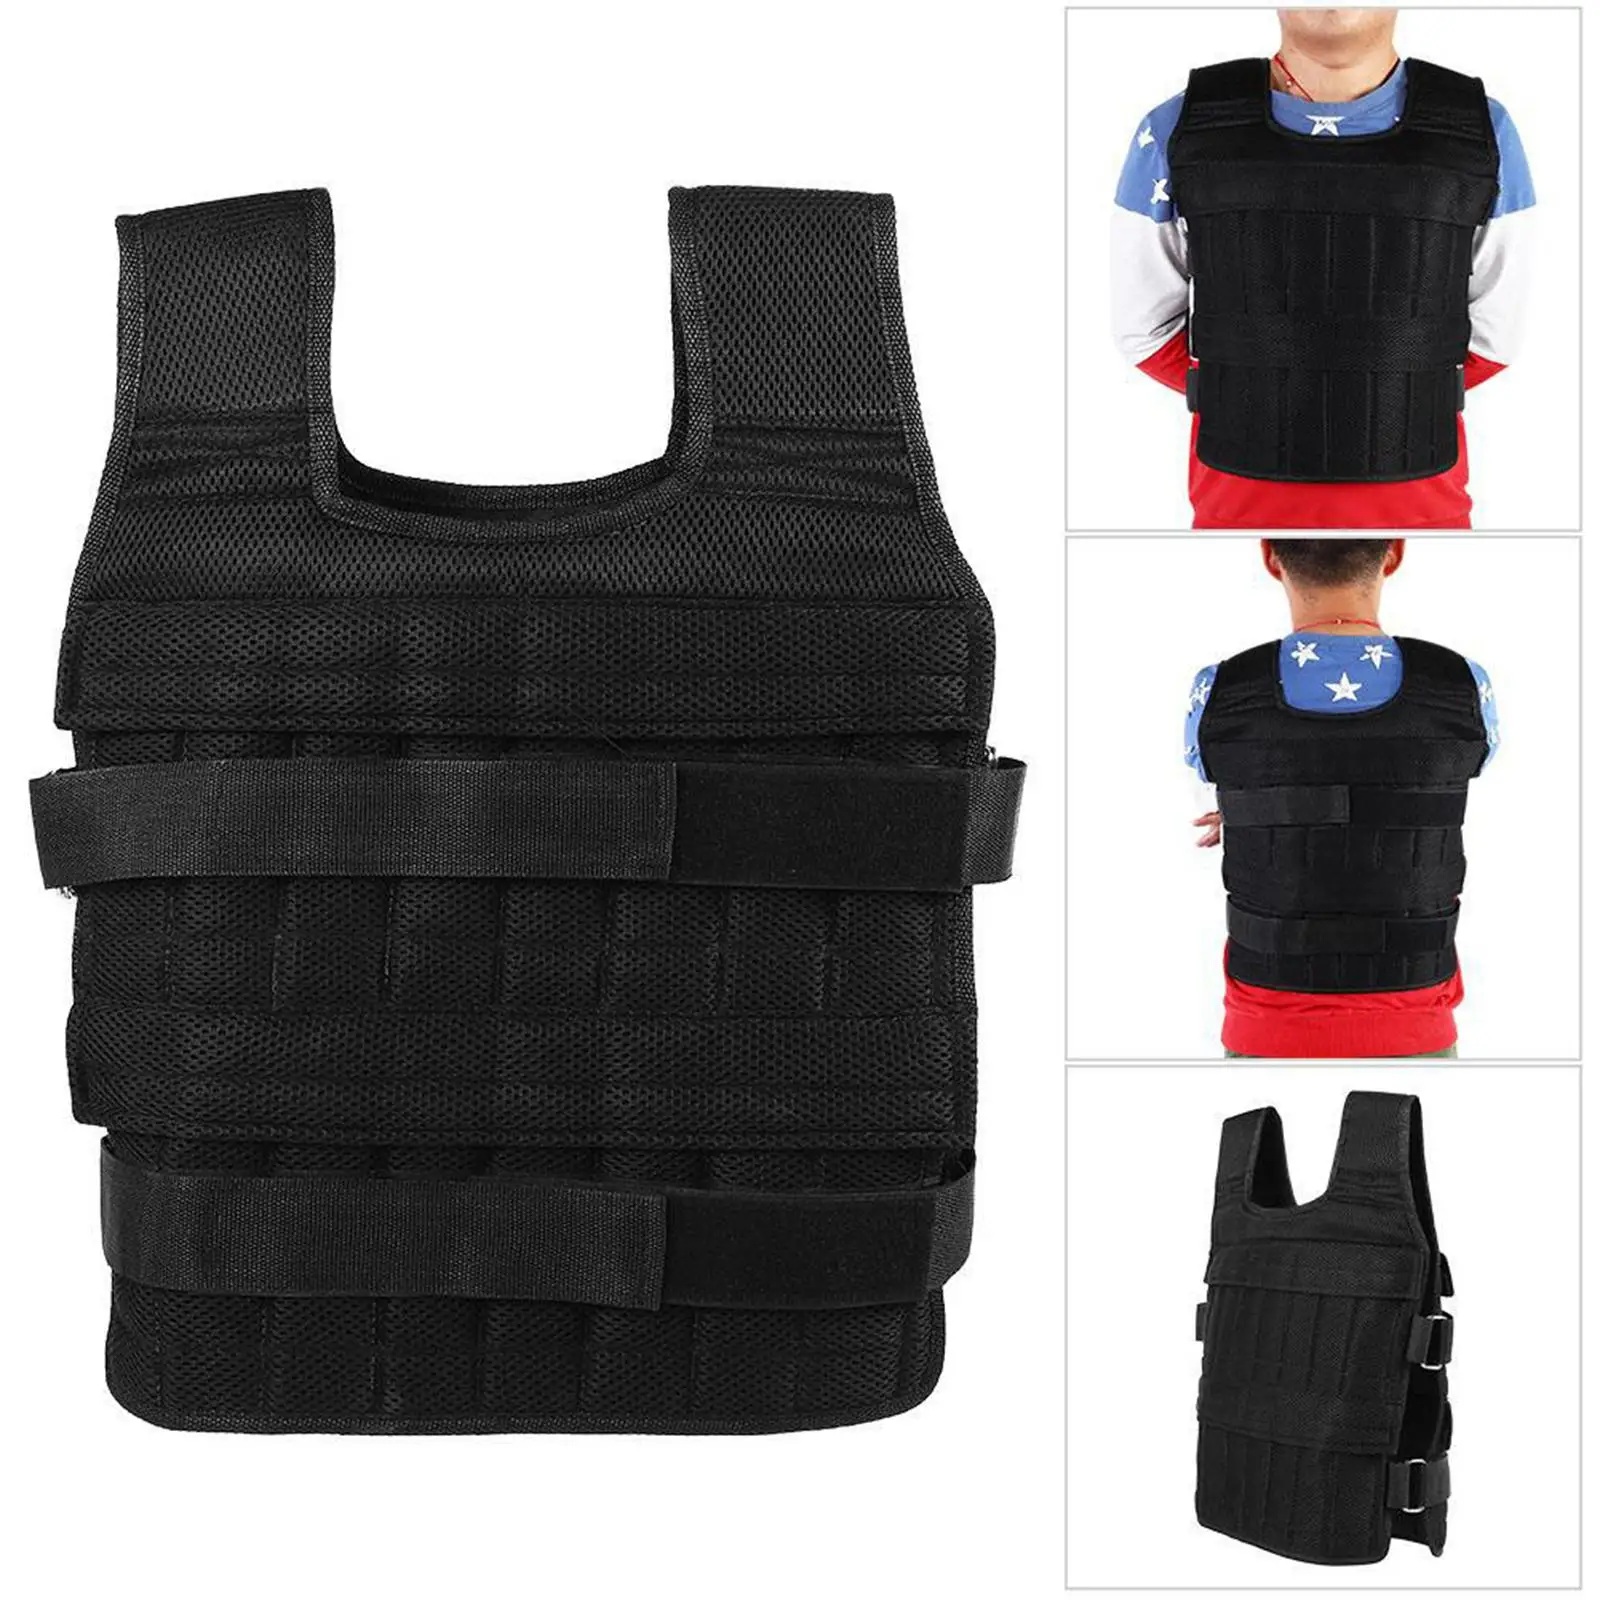 110lbs weight vest with 32 Pocket Adjustable Weight Strength Training Weight